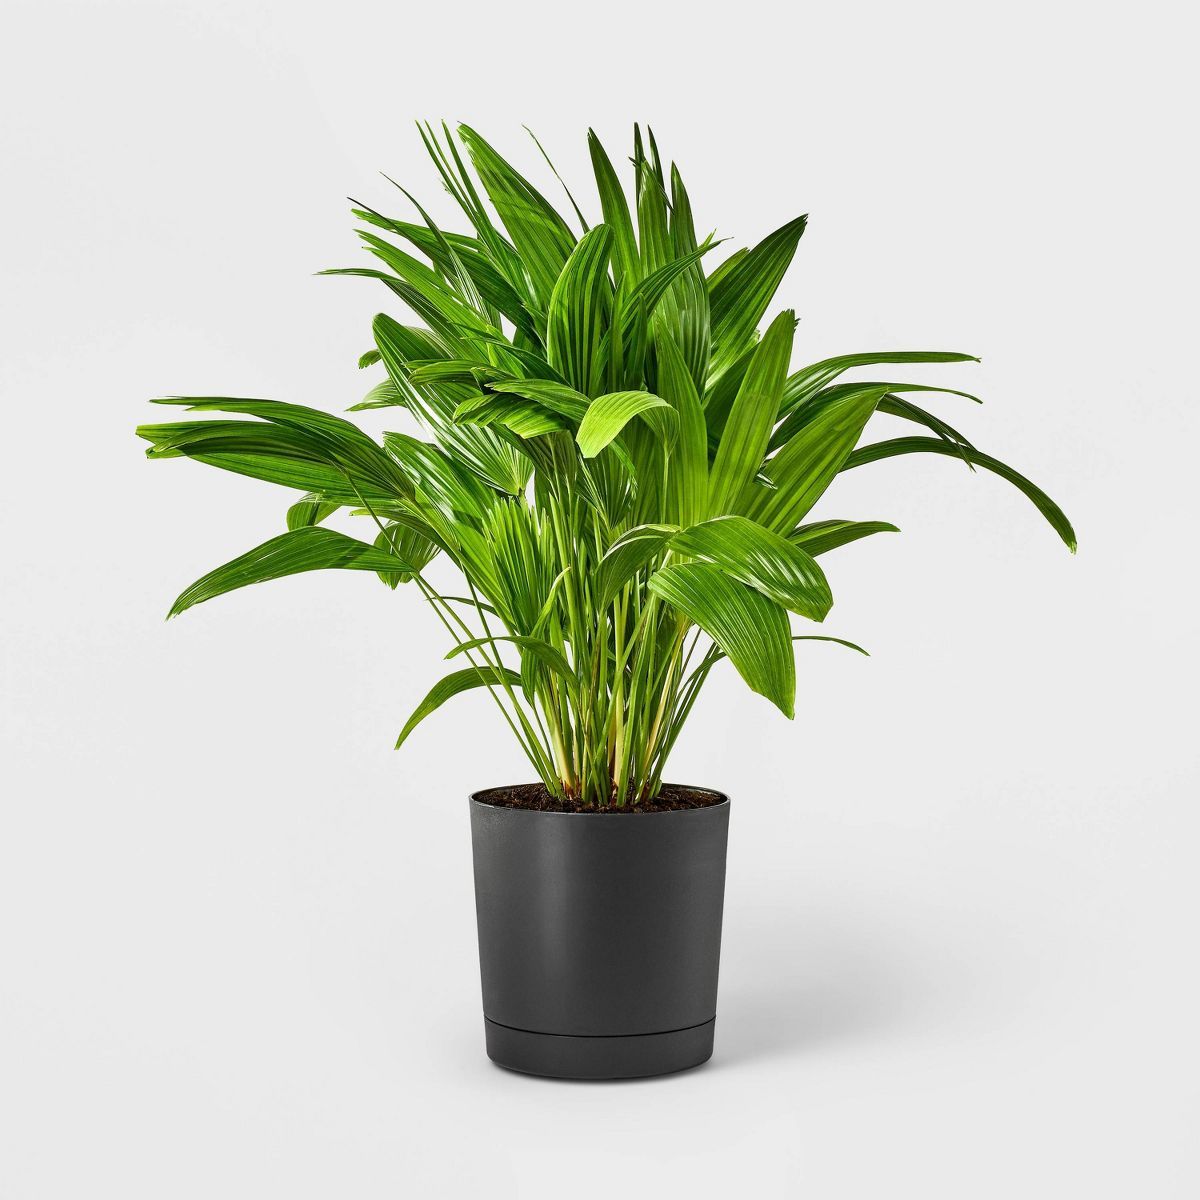 Hilton Carter for Target Live 10" Chinese Fan Palm Houseplant | Target